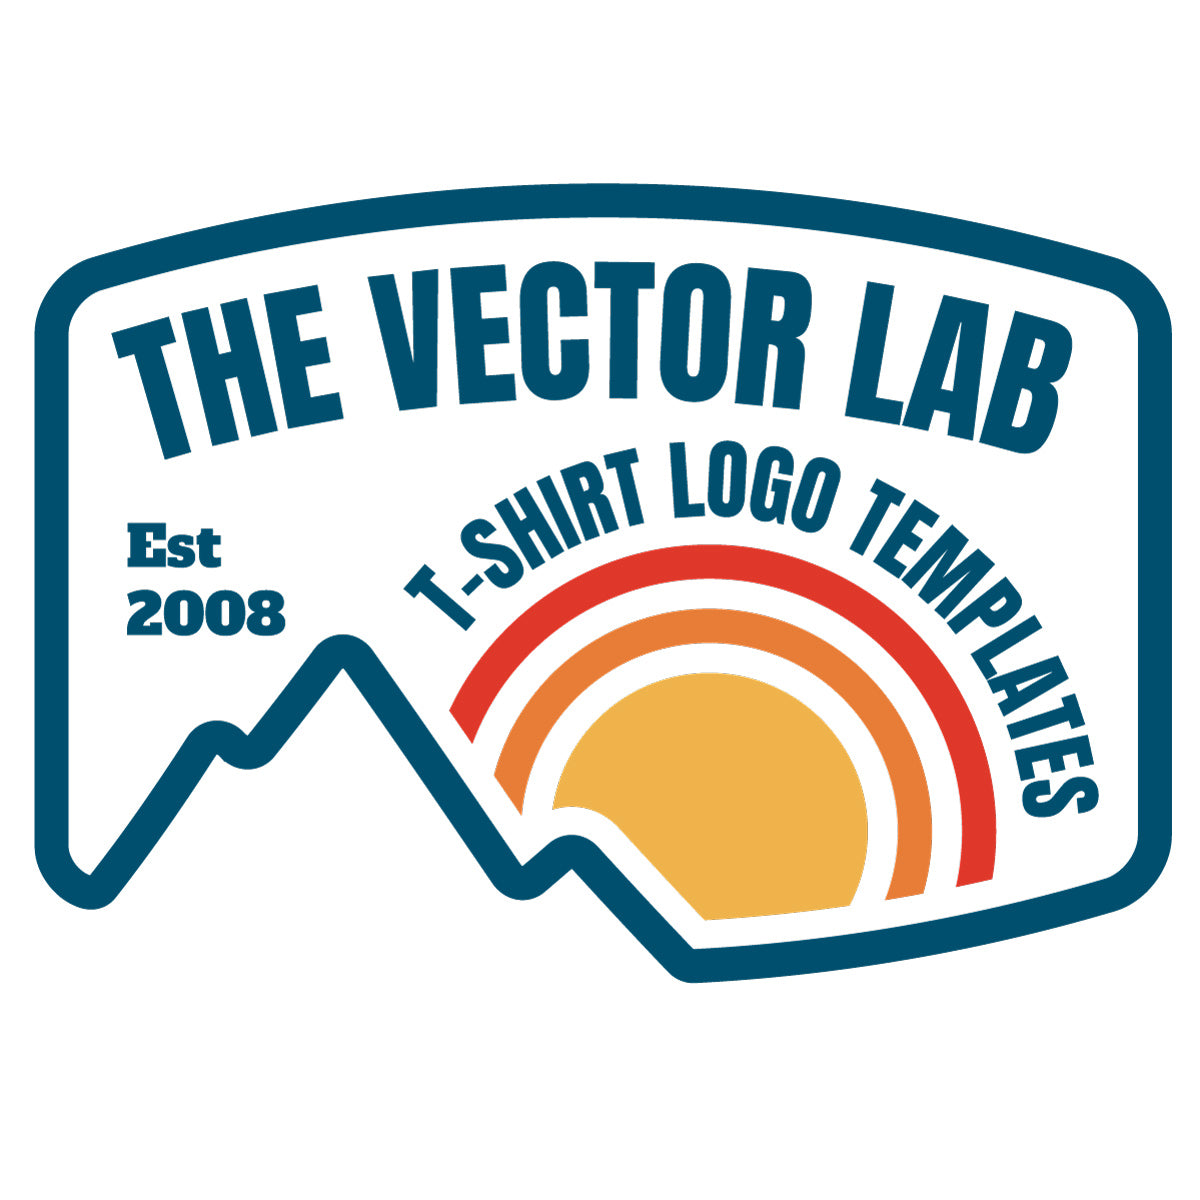 Download T-Shirt Logo Templates - TheVectorLab